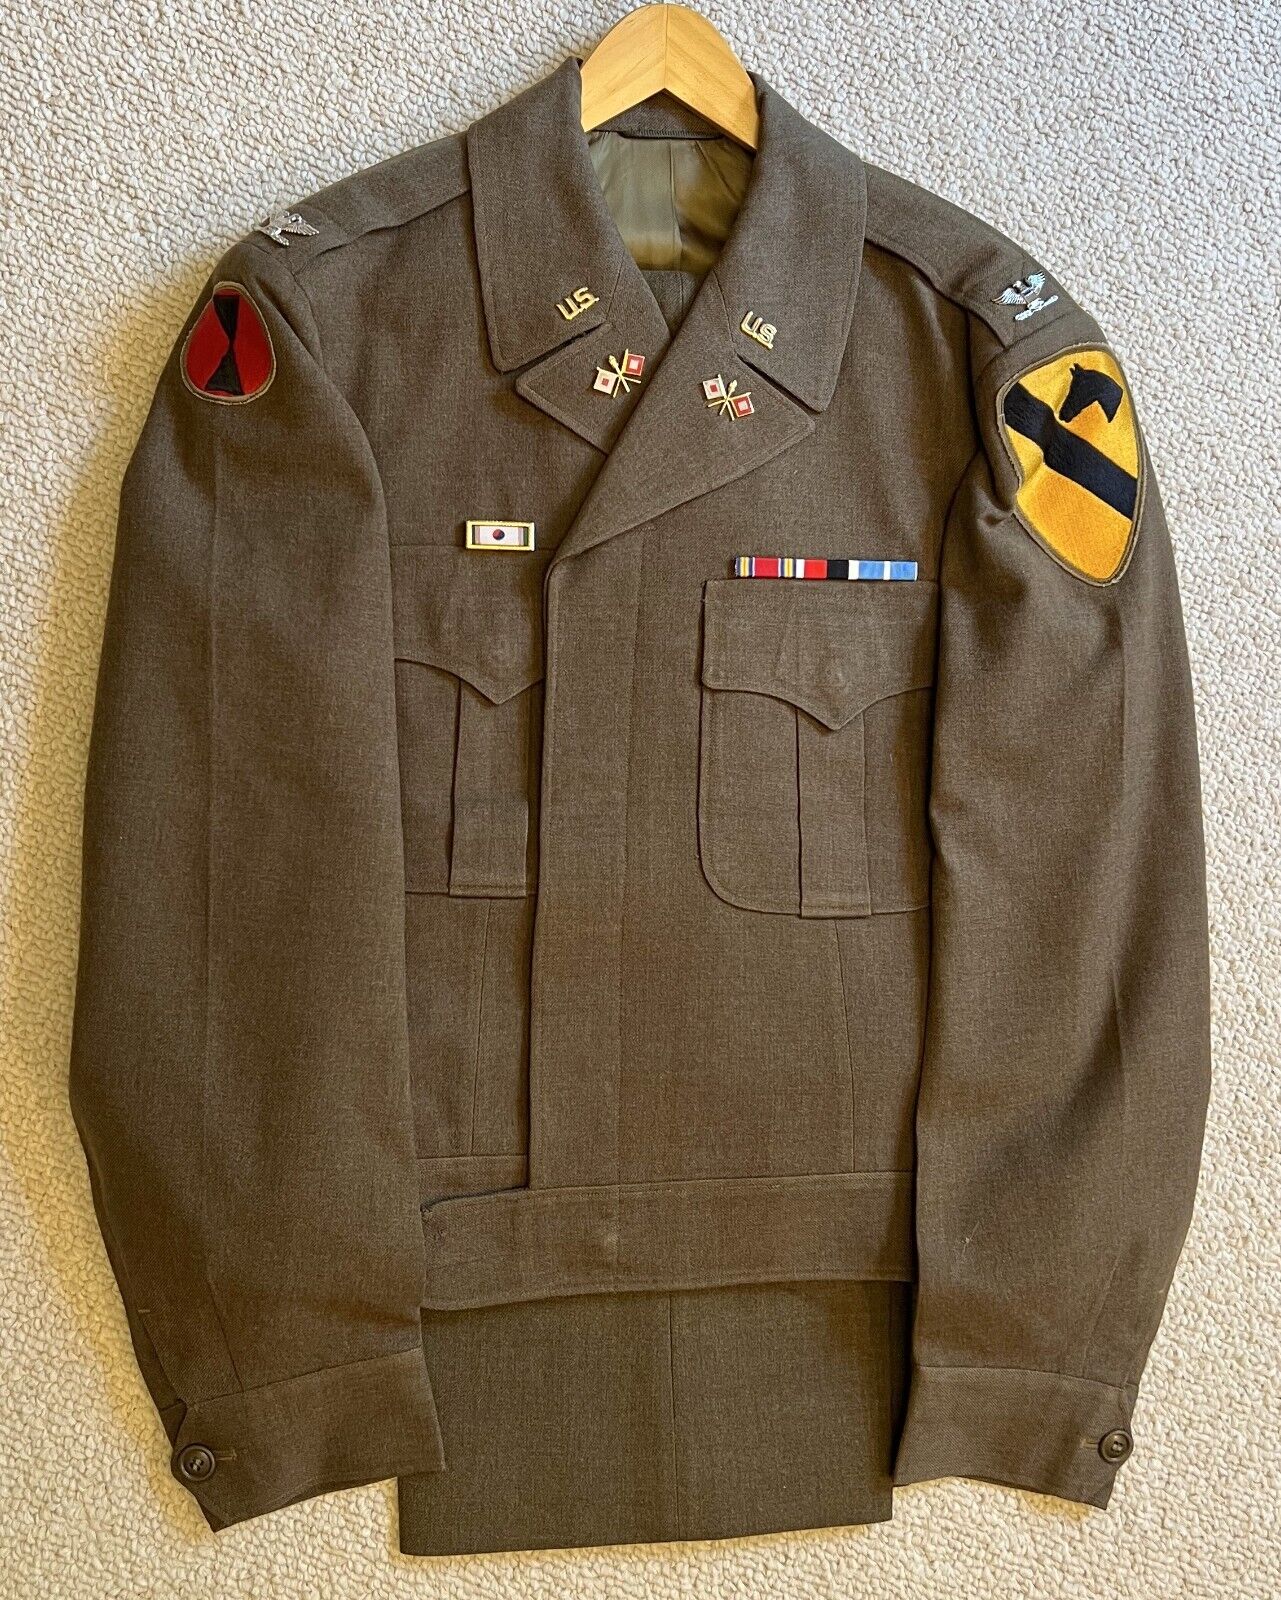 Korean War, Officers Ike Jacket and Pants, Excellent + condition, authentic